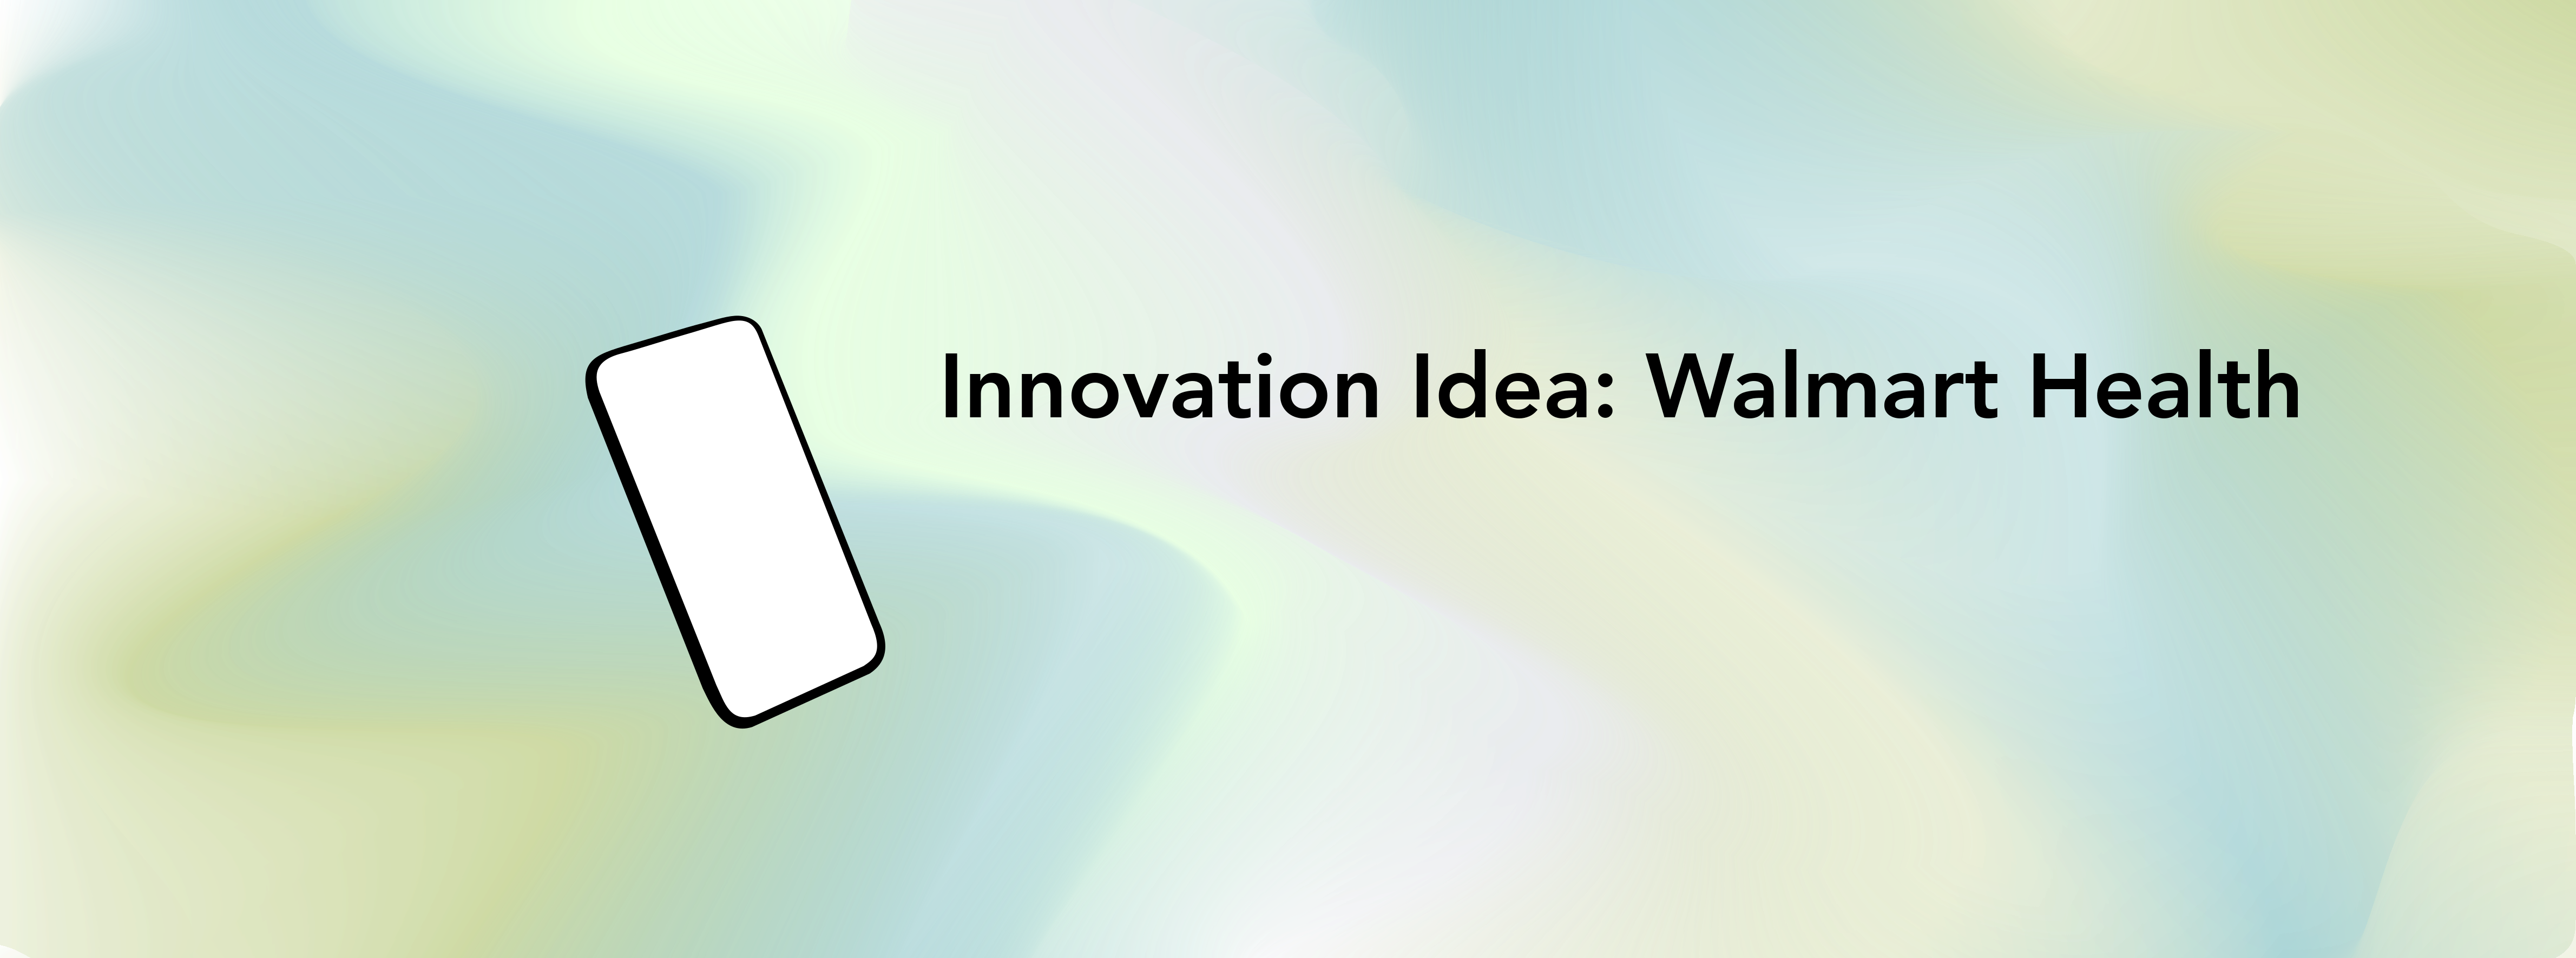 drawing of phone on top of multi-color background with the text Innovation Idea Walmart Health